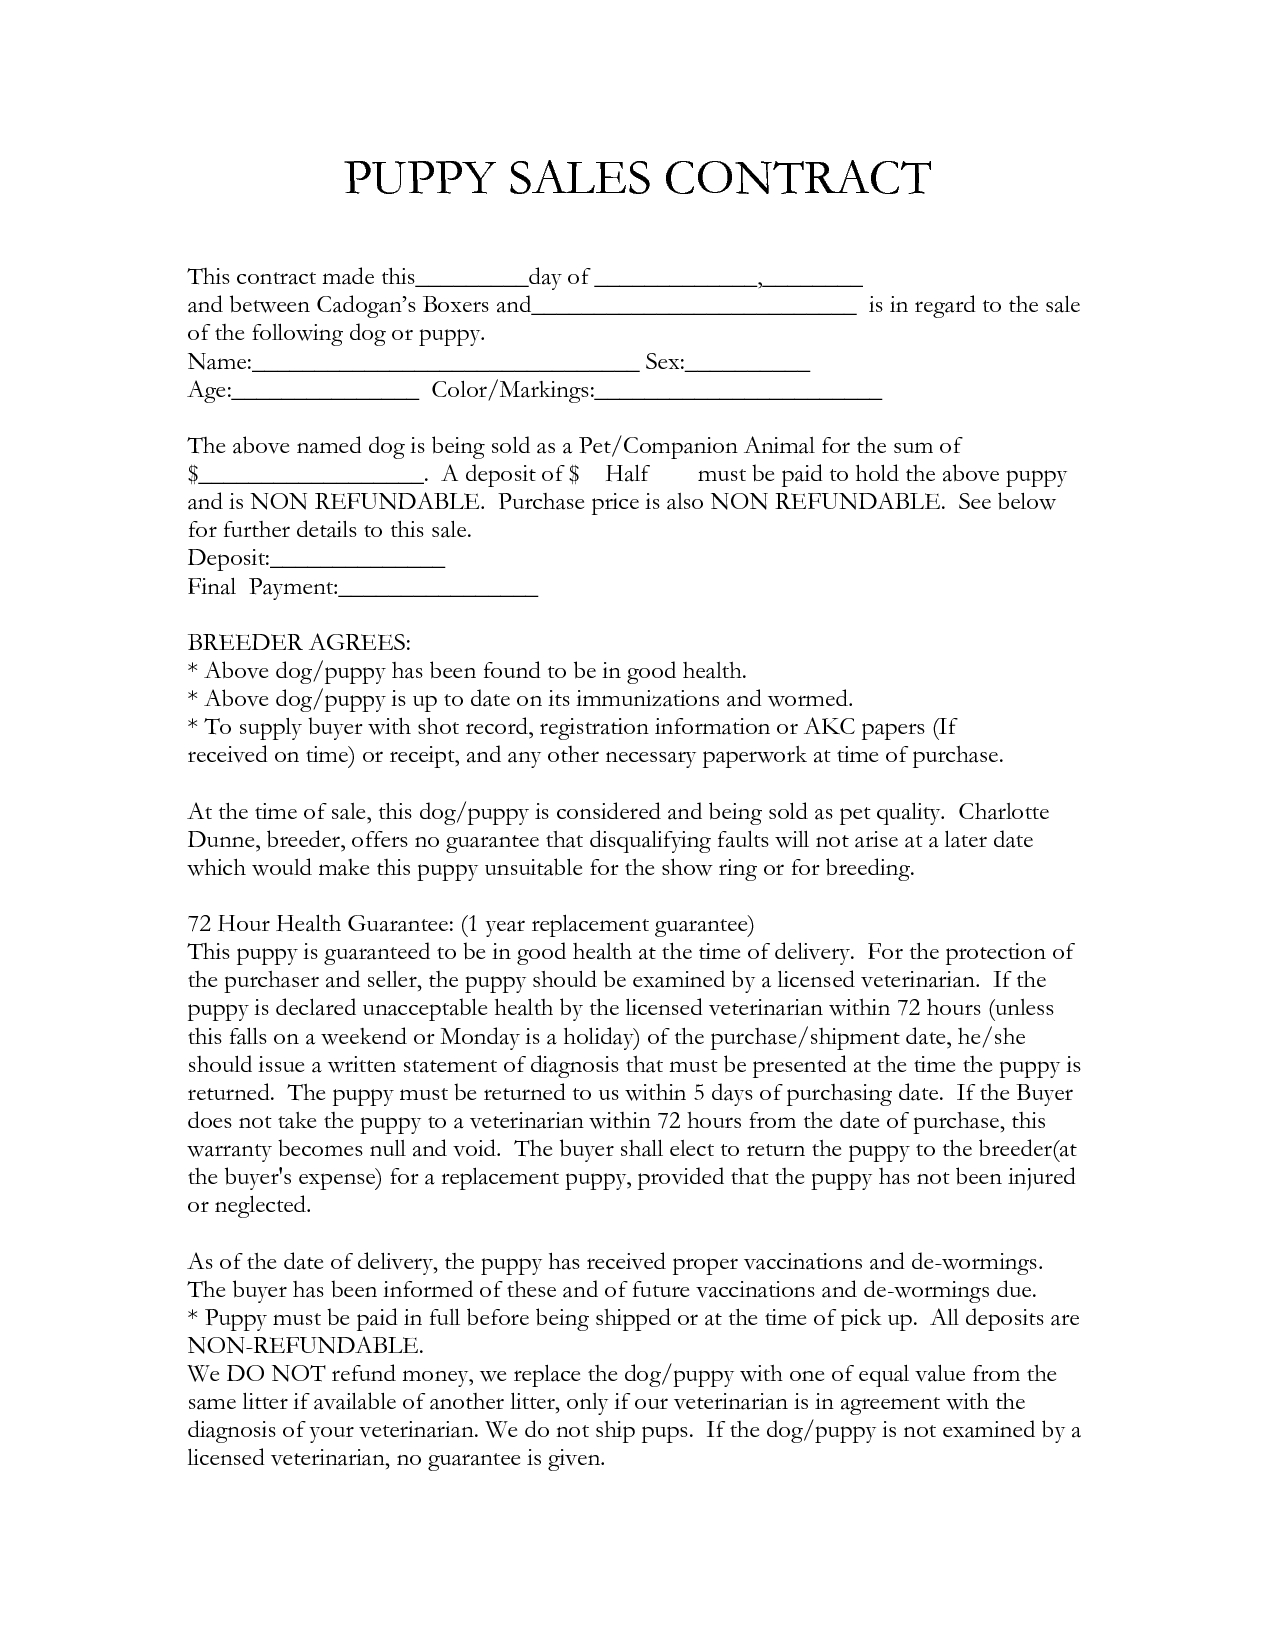 Contract Template | Free Microsoft Word Templates. Sale Contract - Free Printable Puppy Sales Contract